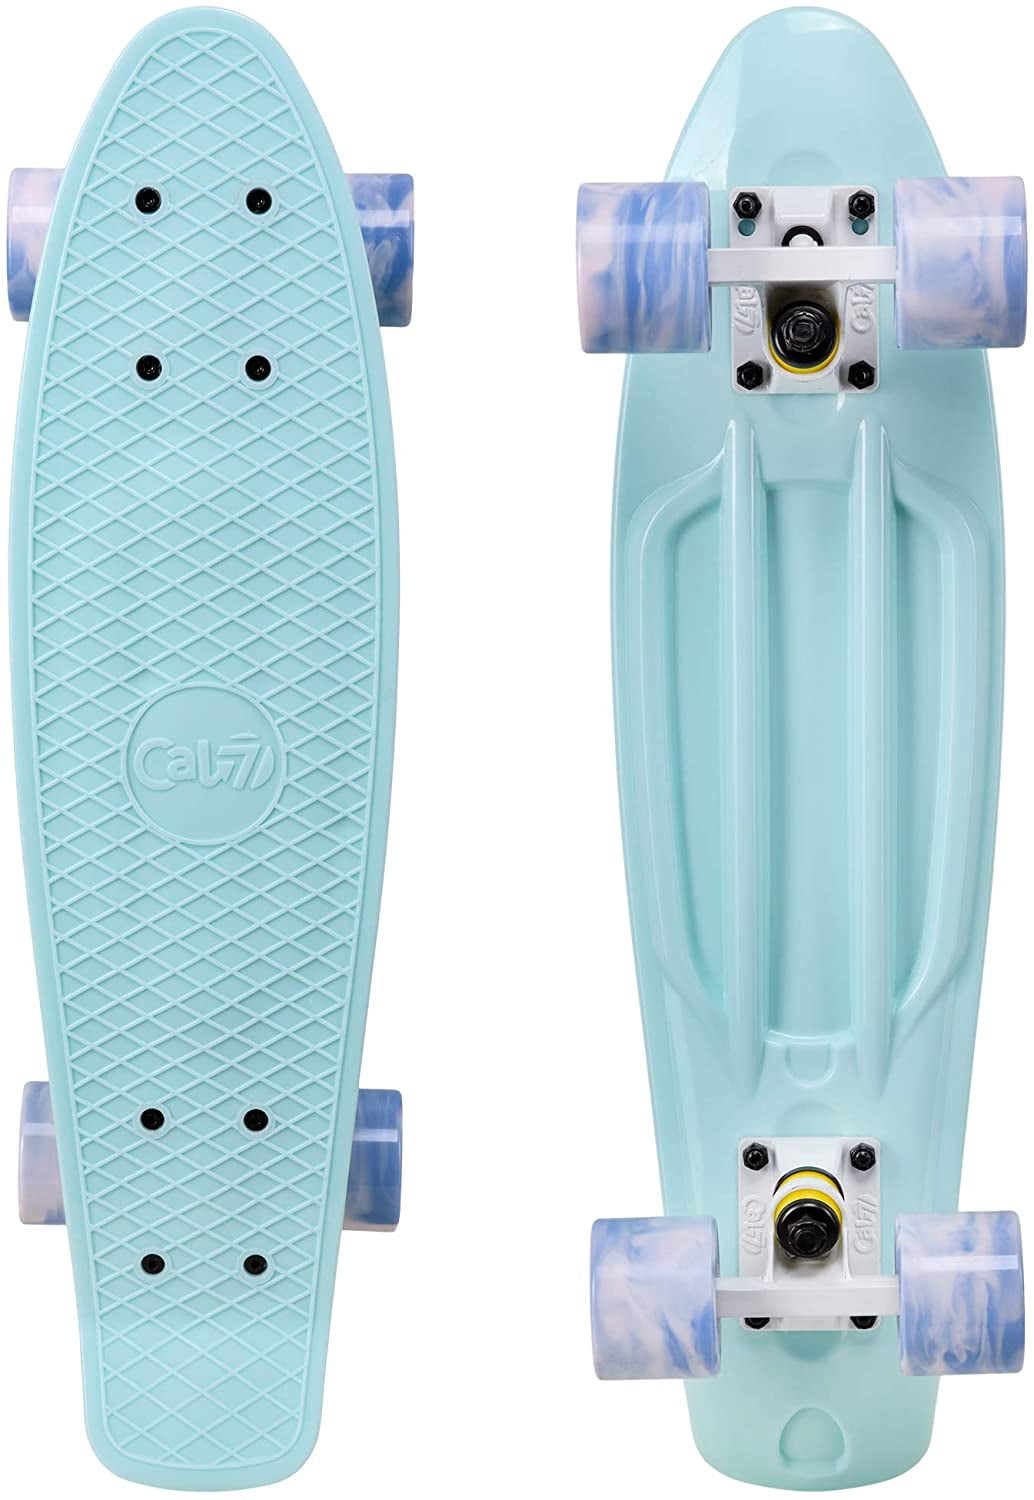 New Plastic Complete Cruiser Penny Style Skateboard Board 22" 9 colors 